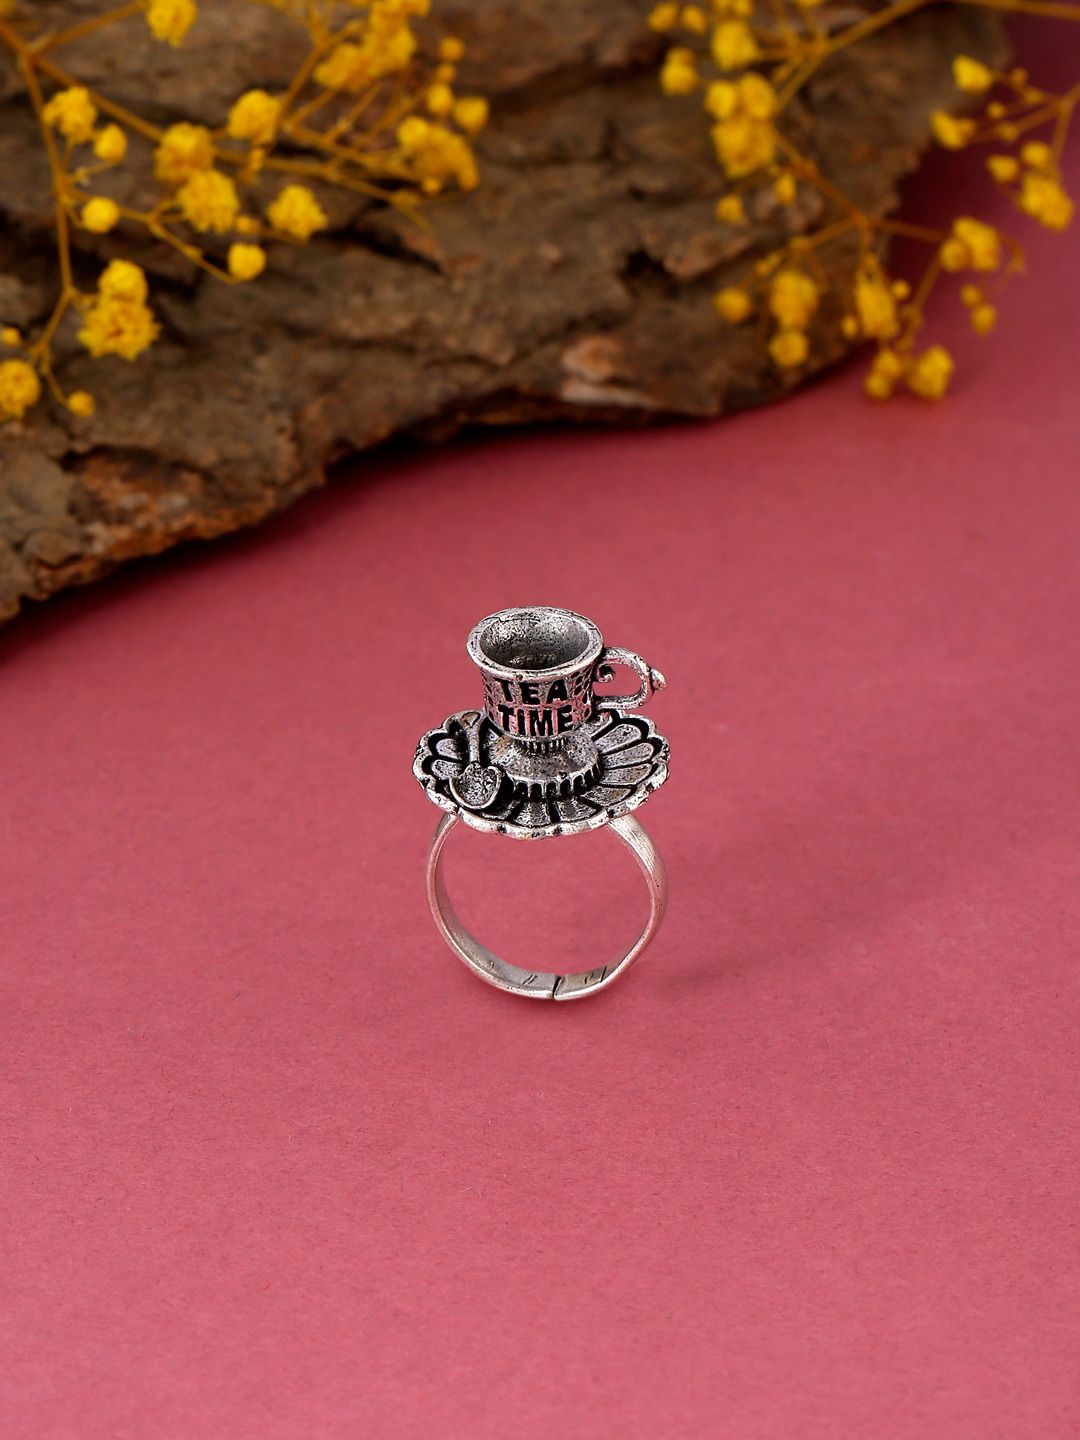 kashwini Silver-Plated Adjustable Finger Ring Price in India